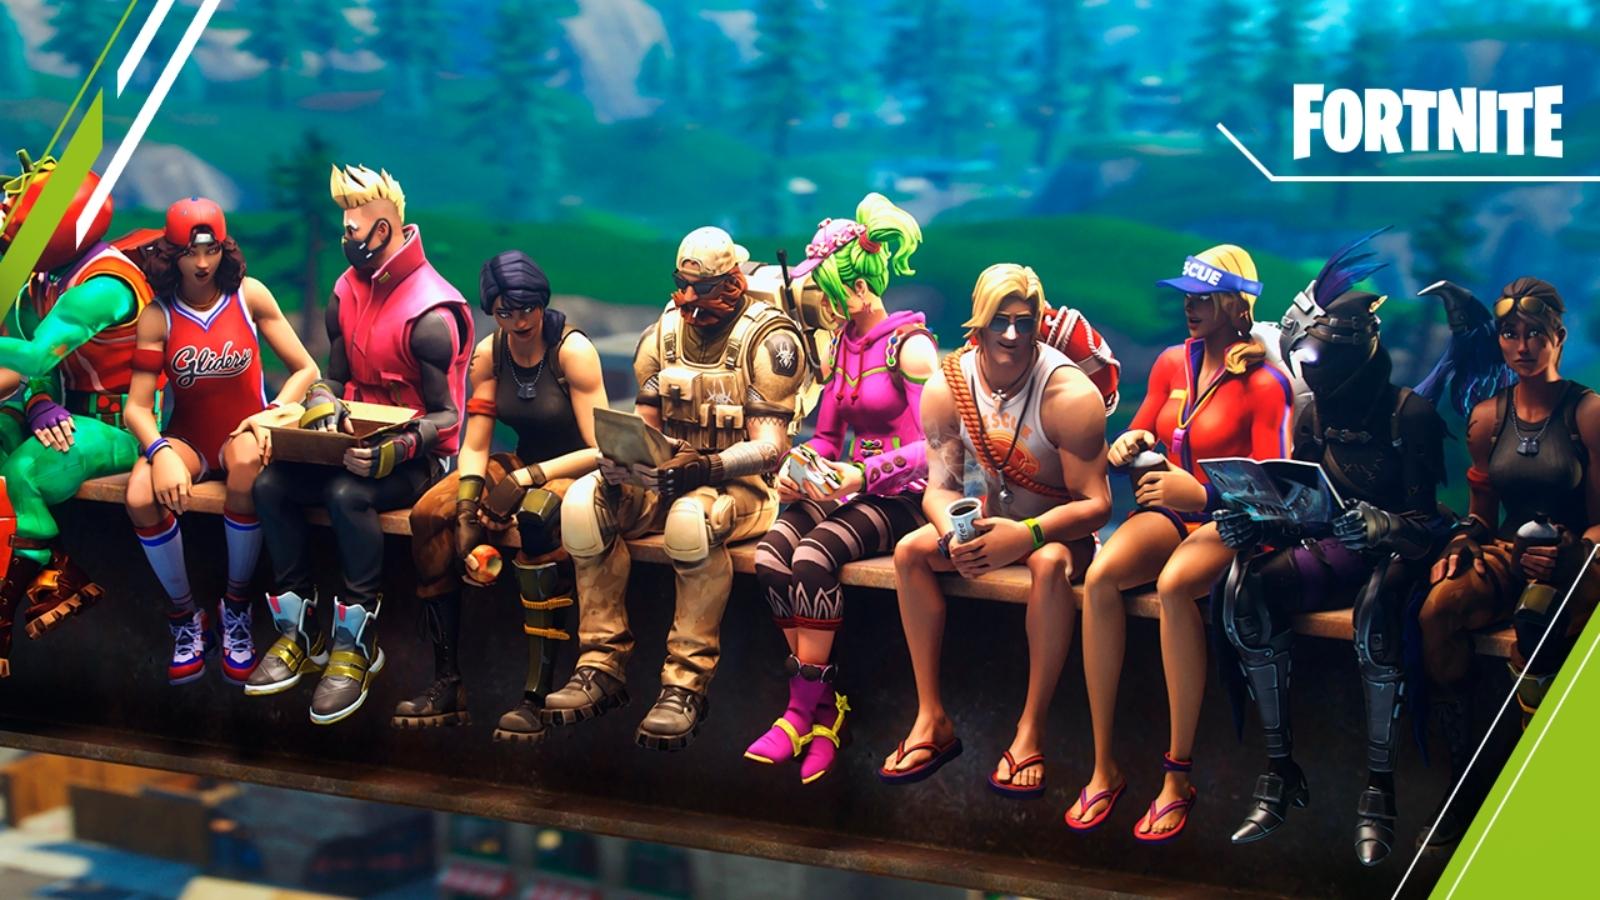 an image of some characters from Fortnite